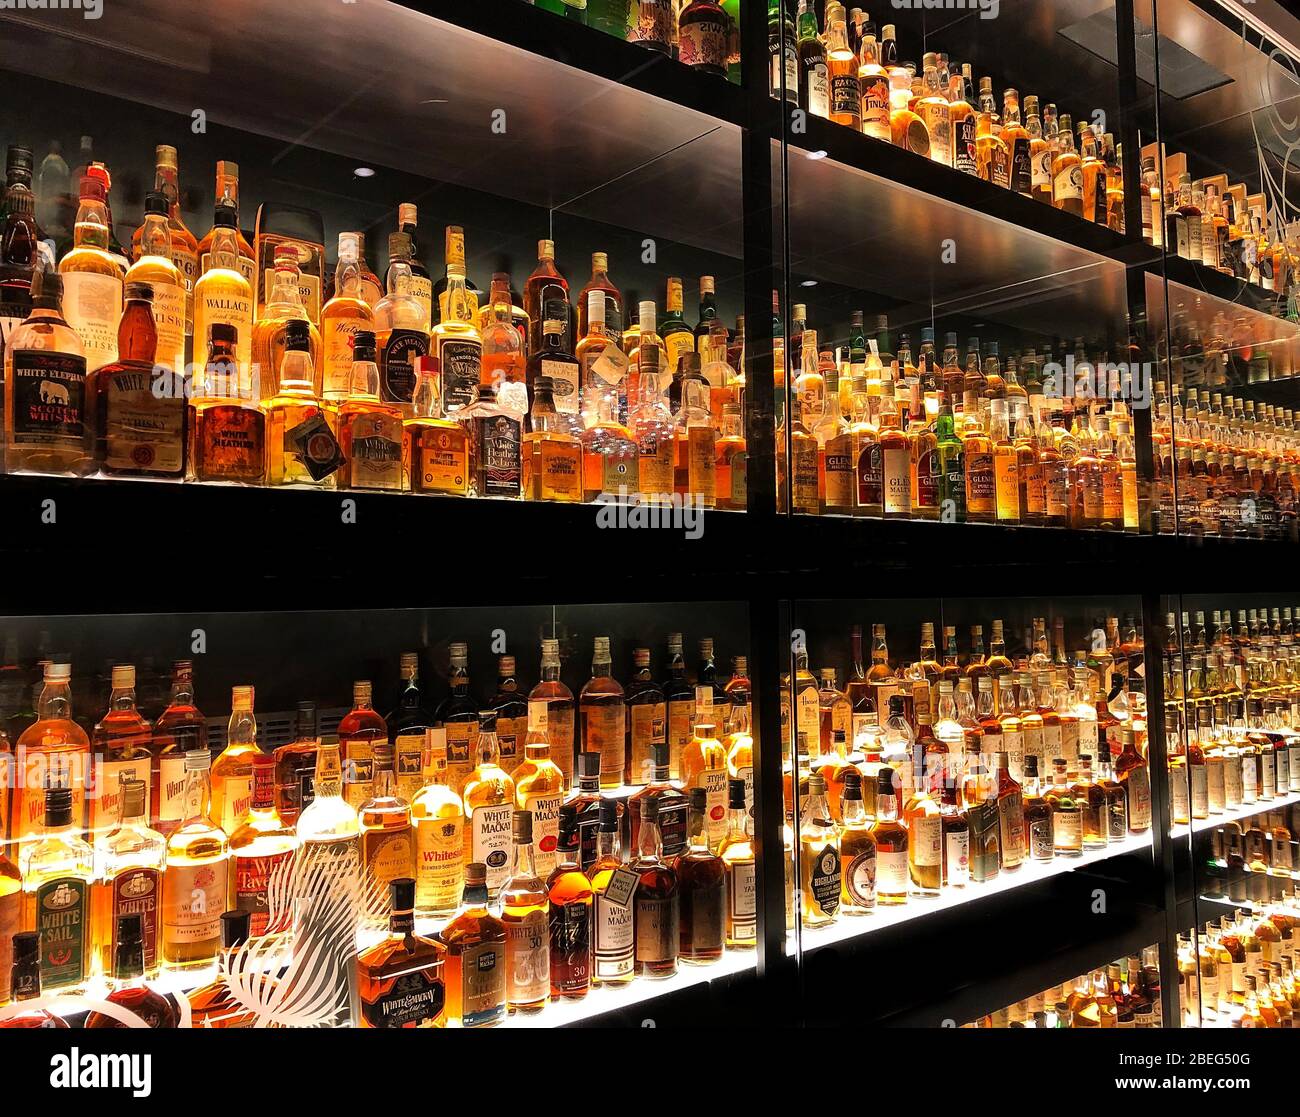 Edinburgh, Scotland - May 12, 2019: The Diageo Claive Vidiz Collection of 3.384 bottles of whiskey, displayed at the Scotch Whisky Experience. Stock Photo